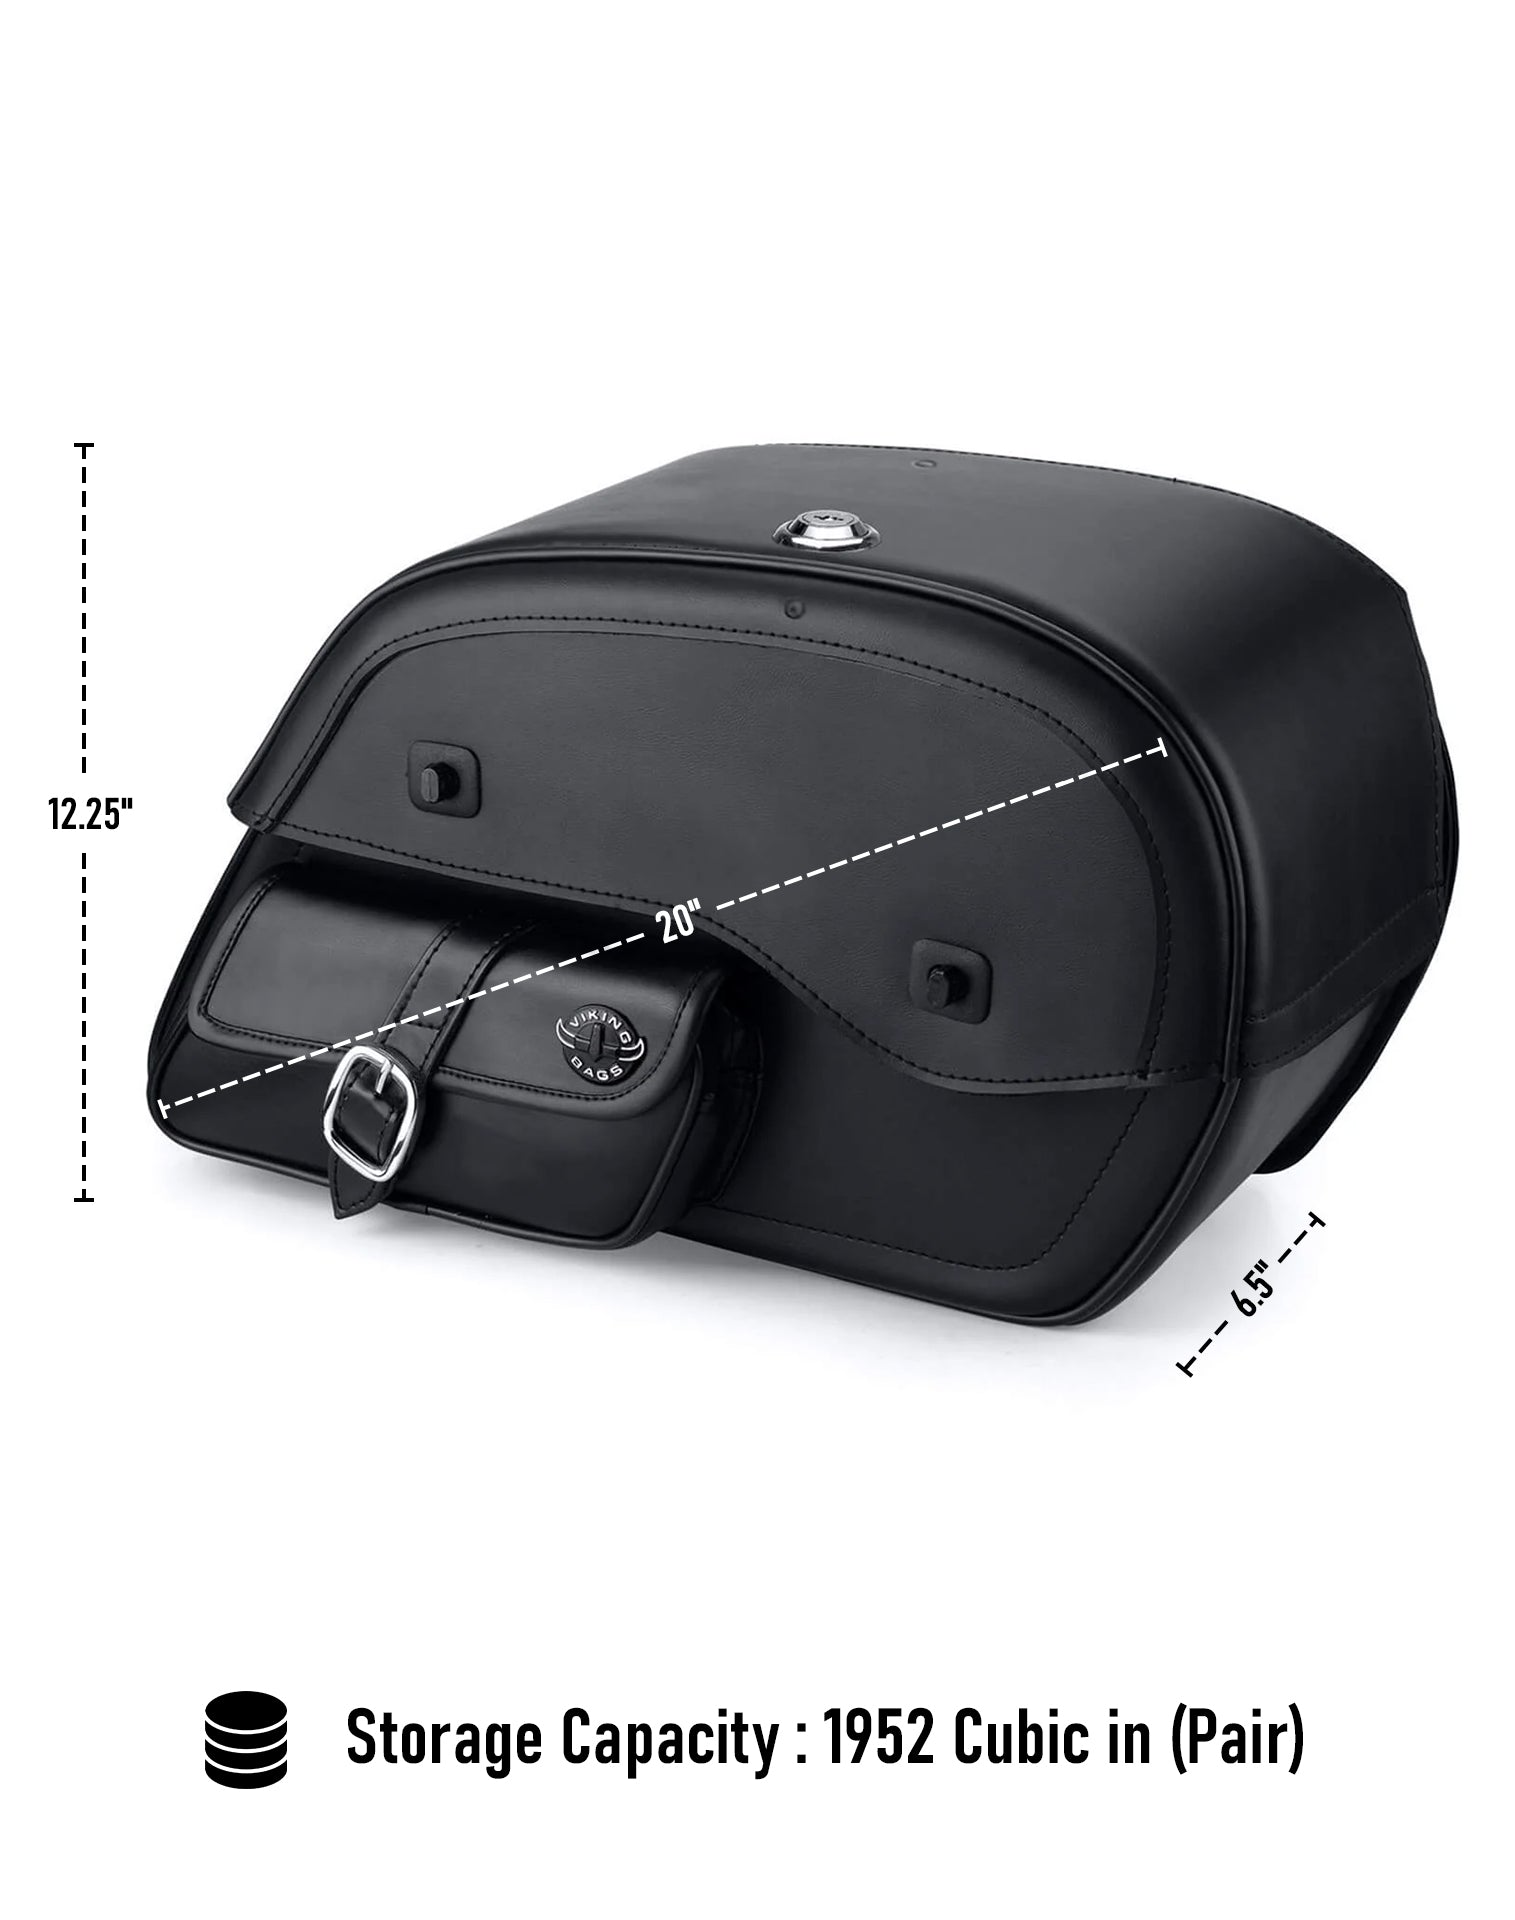 Viking Essential Side Pocket Large Suzuki Volusia 800 Leather Motorcycle Saddlebags Can Store Your Ridings Gears